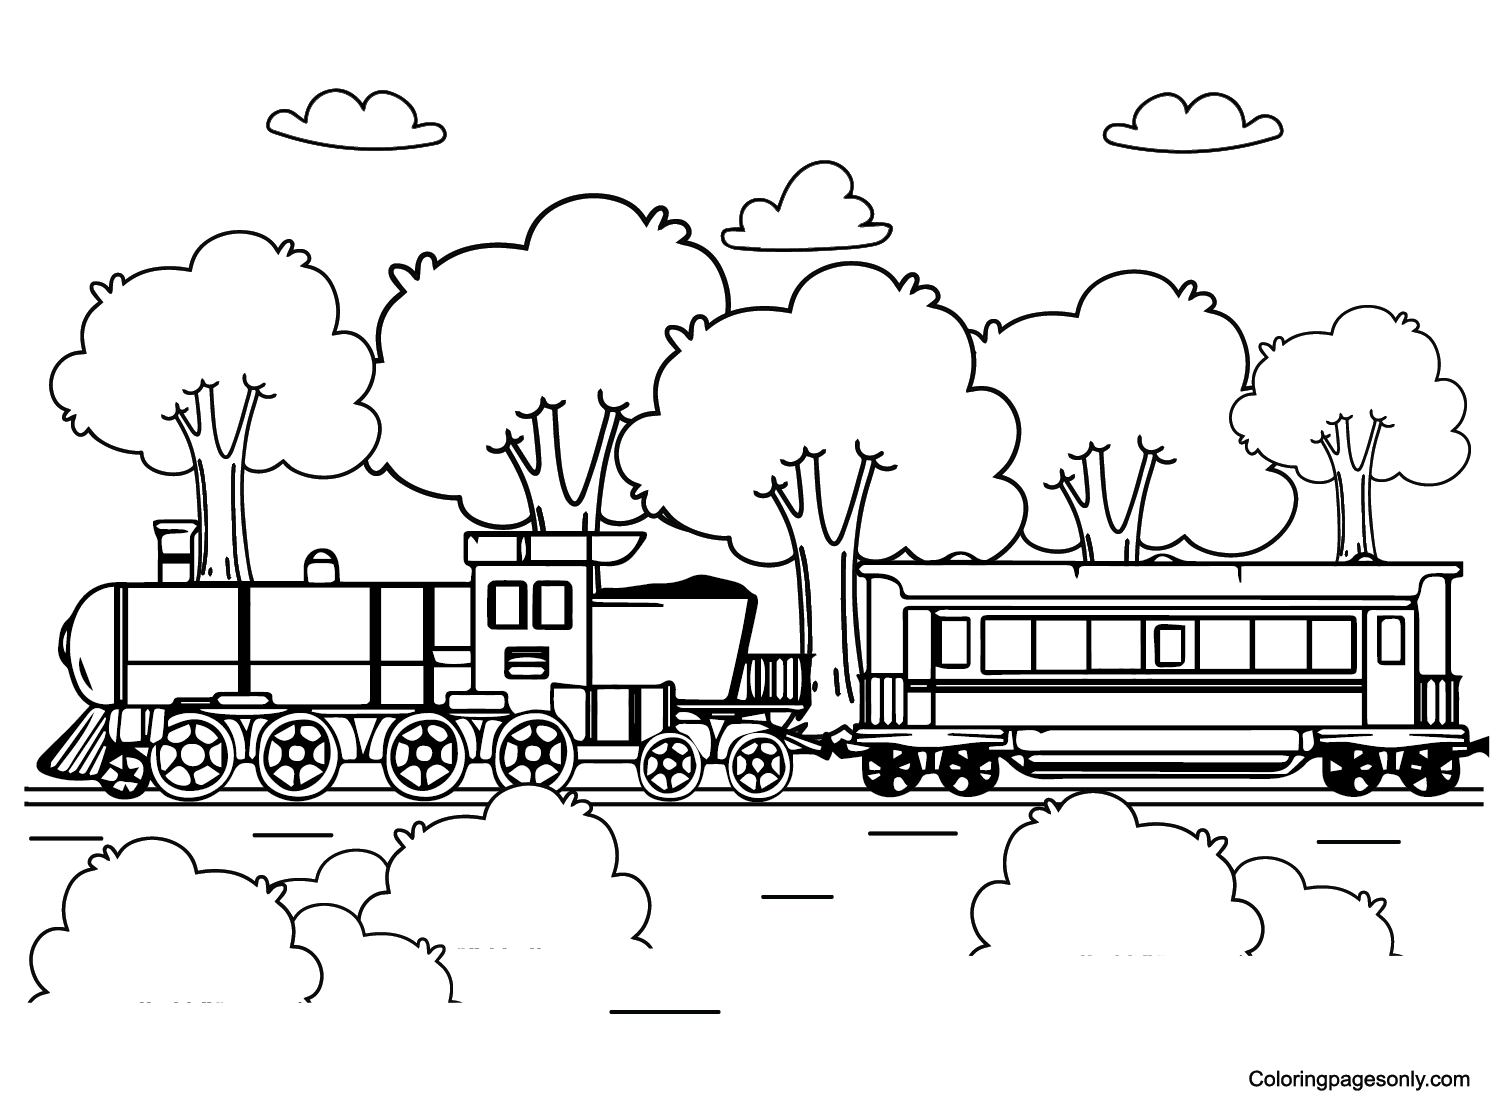 Polar Express for Kids Coloring Page